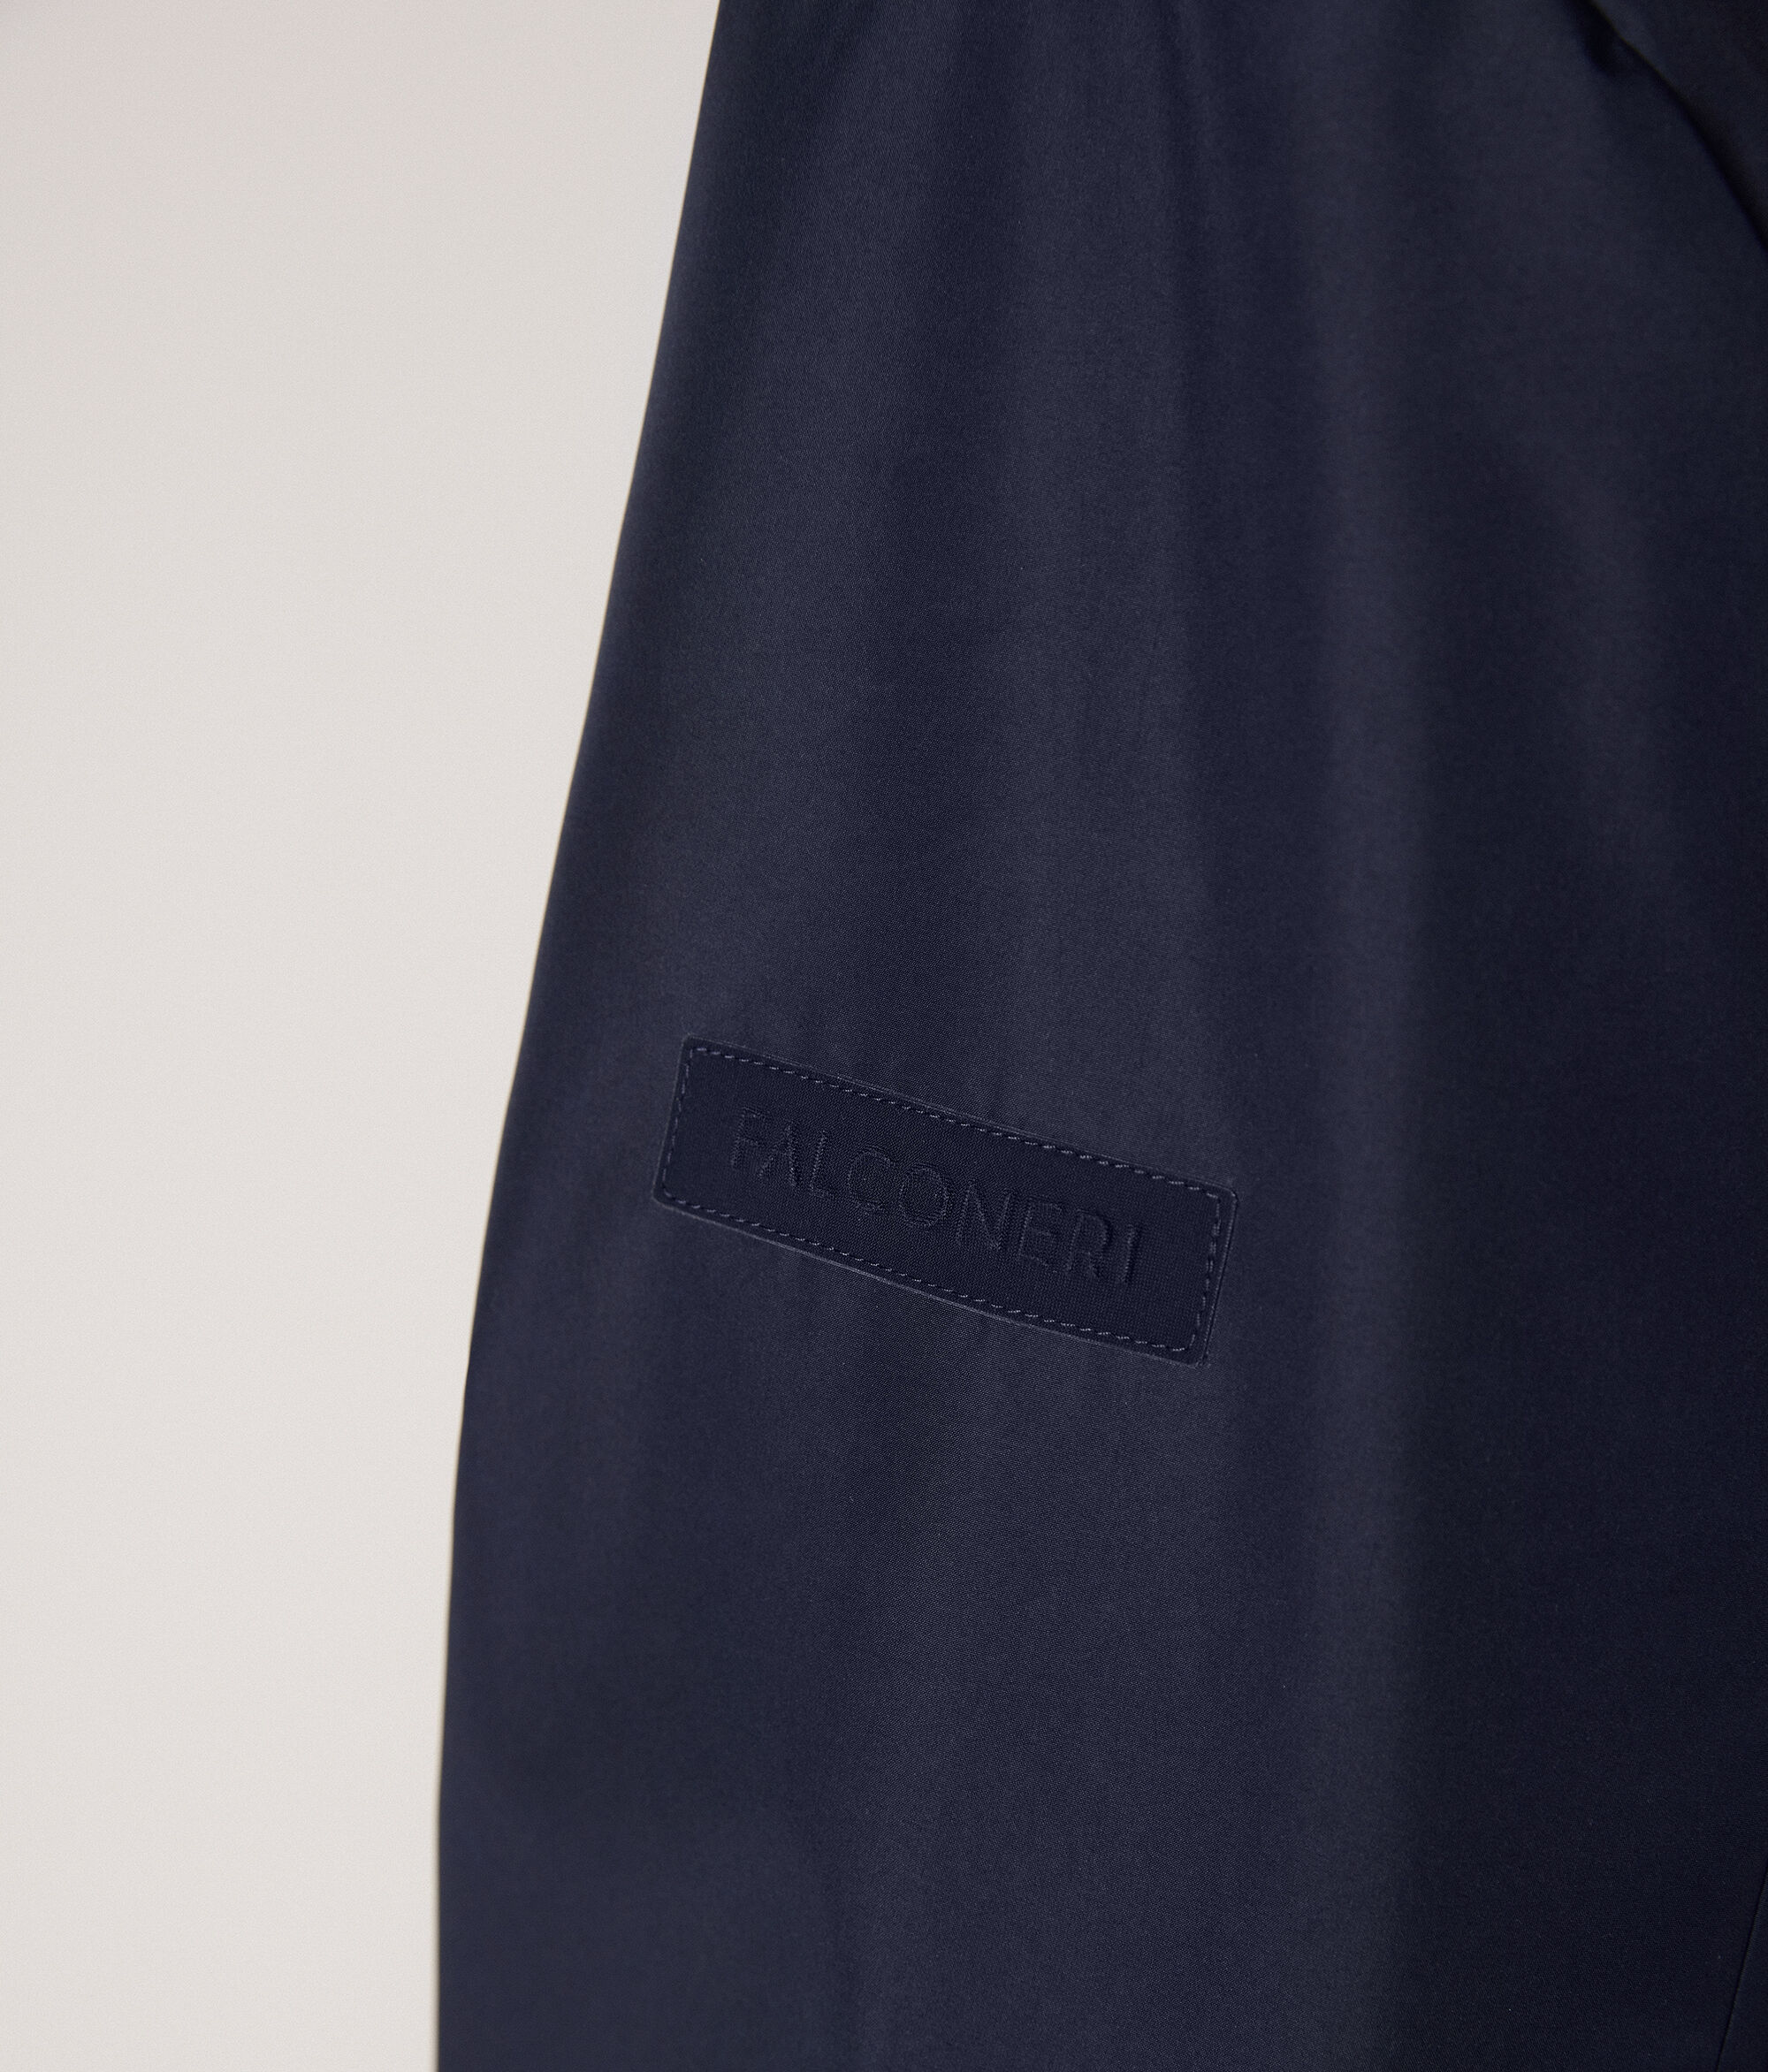 Technical Short Jacket with Cashmere Lining